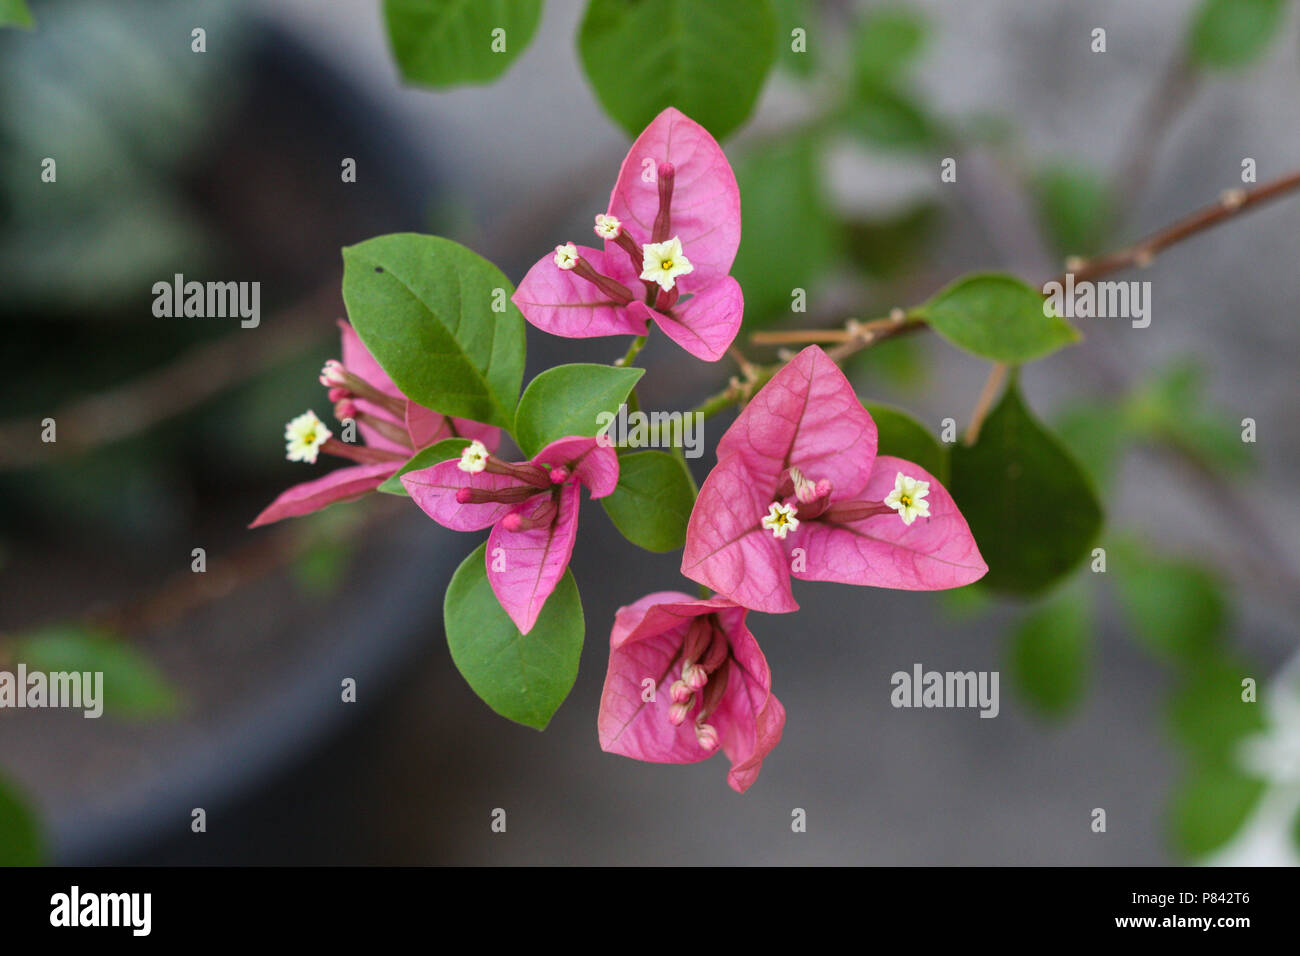 Brazilian ornamental plant Bougainvillea with pink and white flowers with yellow center. Background blurred in green color. Stock Photo